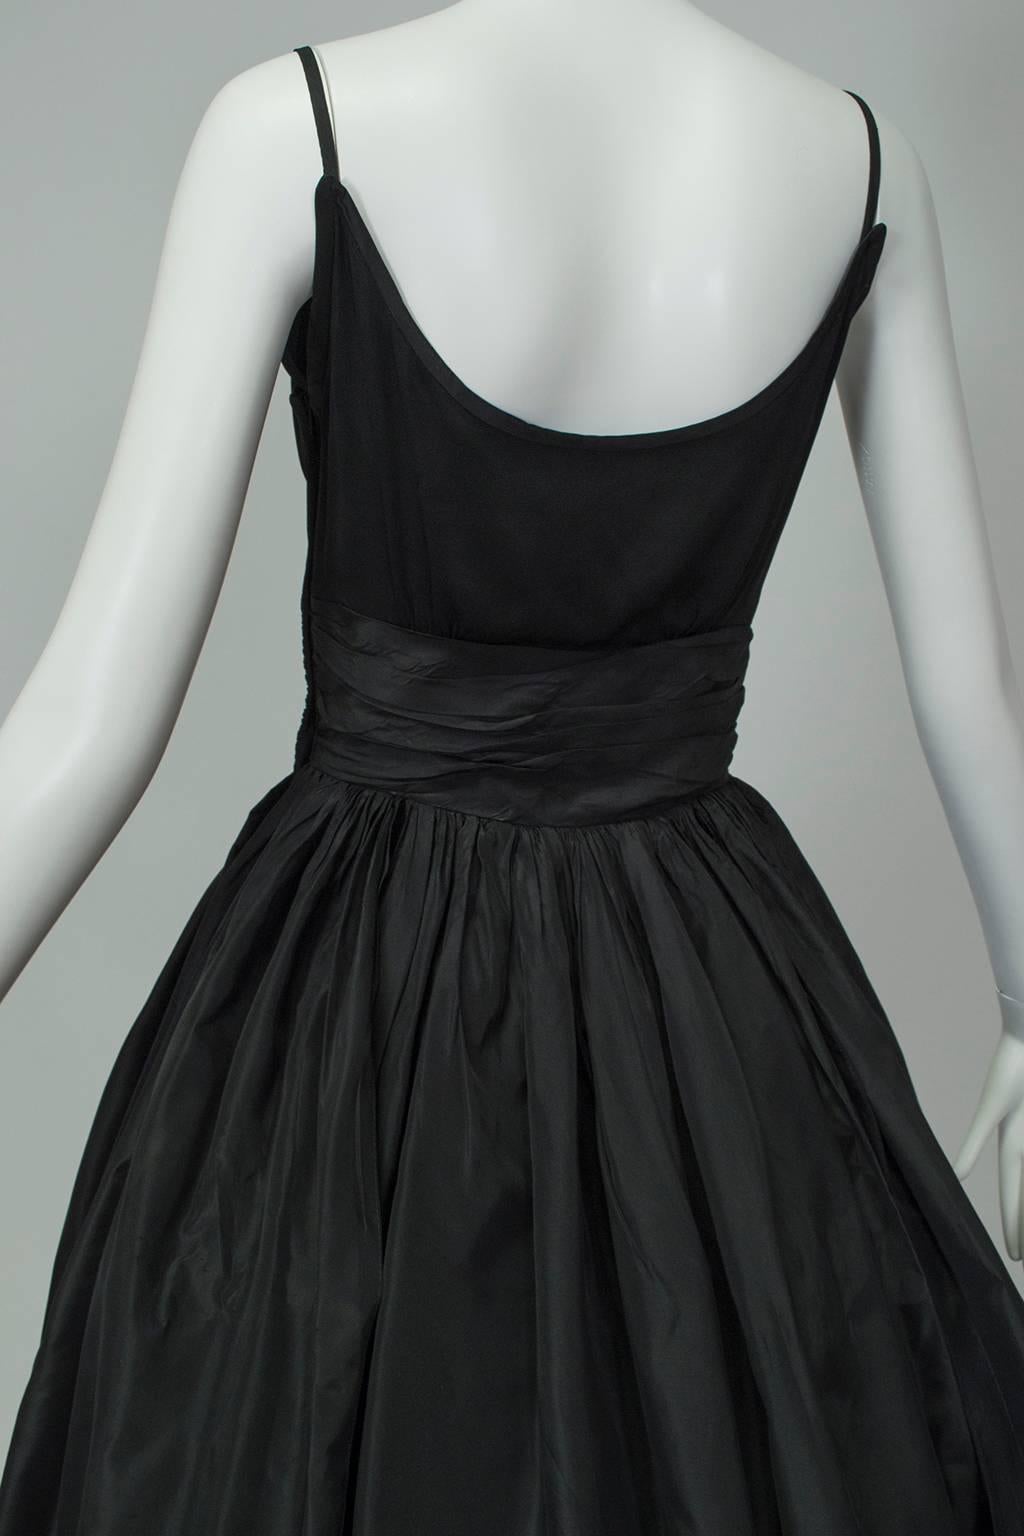 Black Shoulder Bow Sabrina Dress with Looping Car Wash Skirt - XS, 1950s For Sale 1